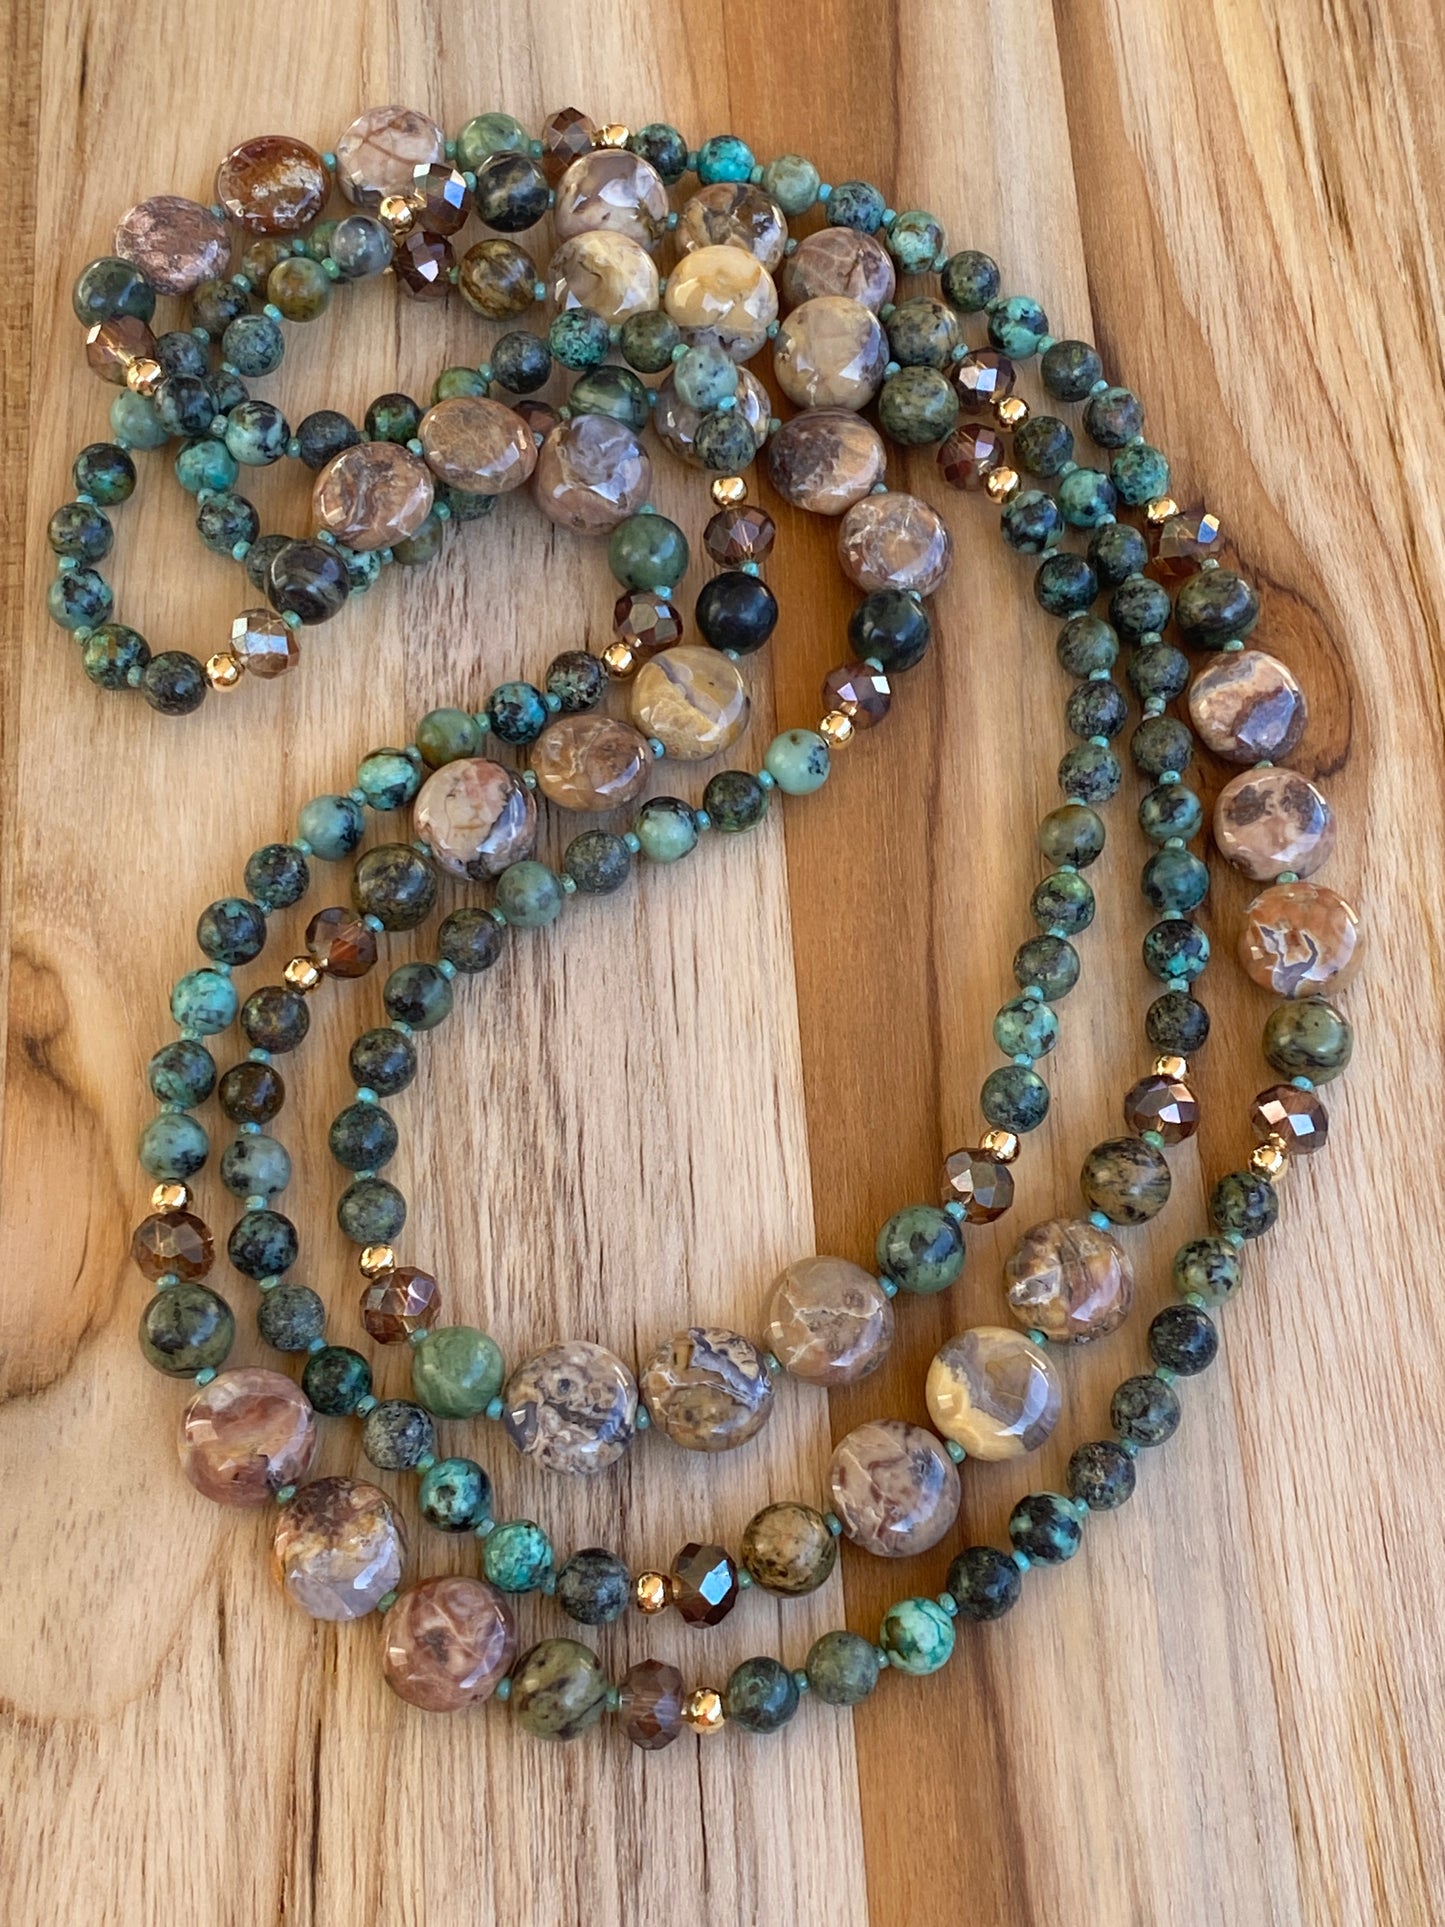 Extra Long Beaded Necklace with Crazy Lace Agate Green Jasper and African Turquoise Beads